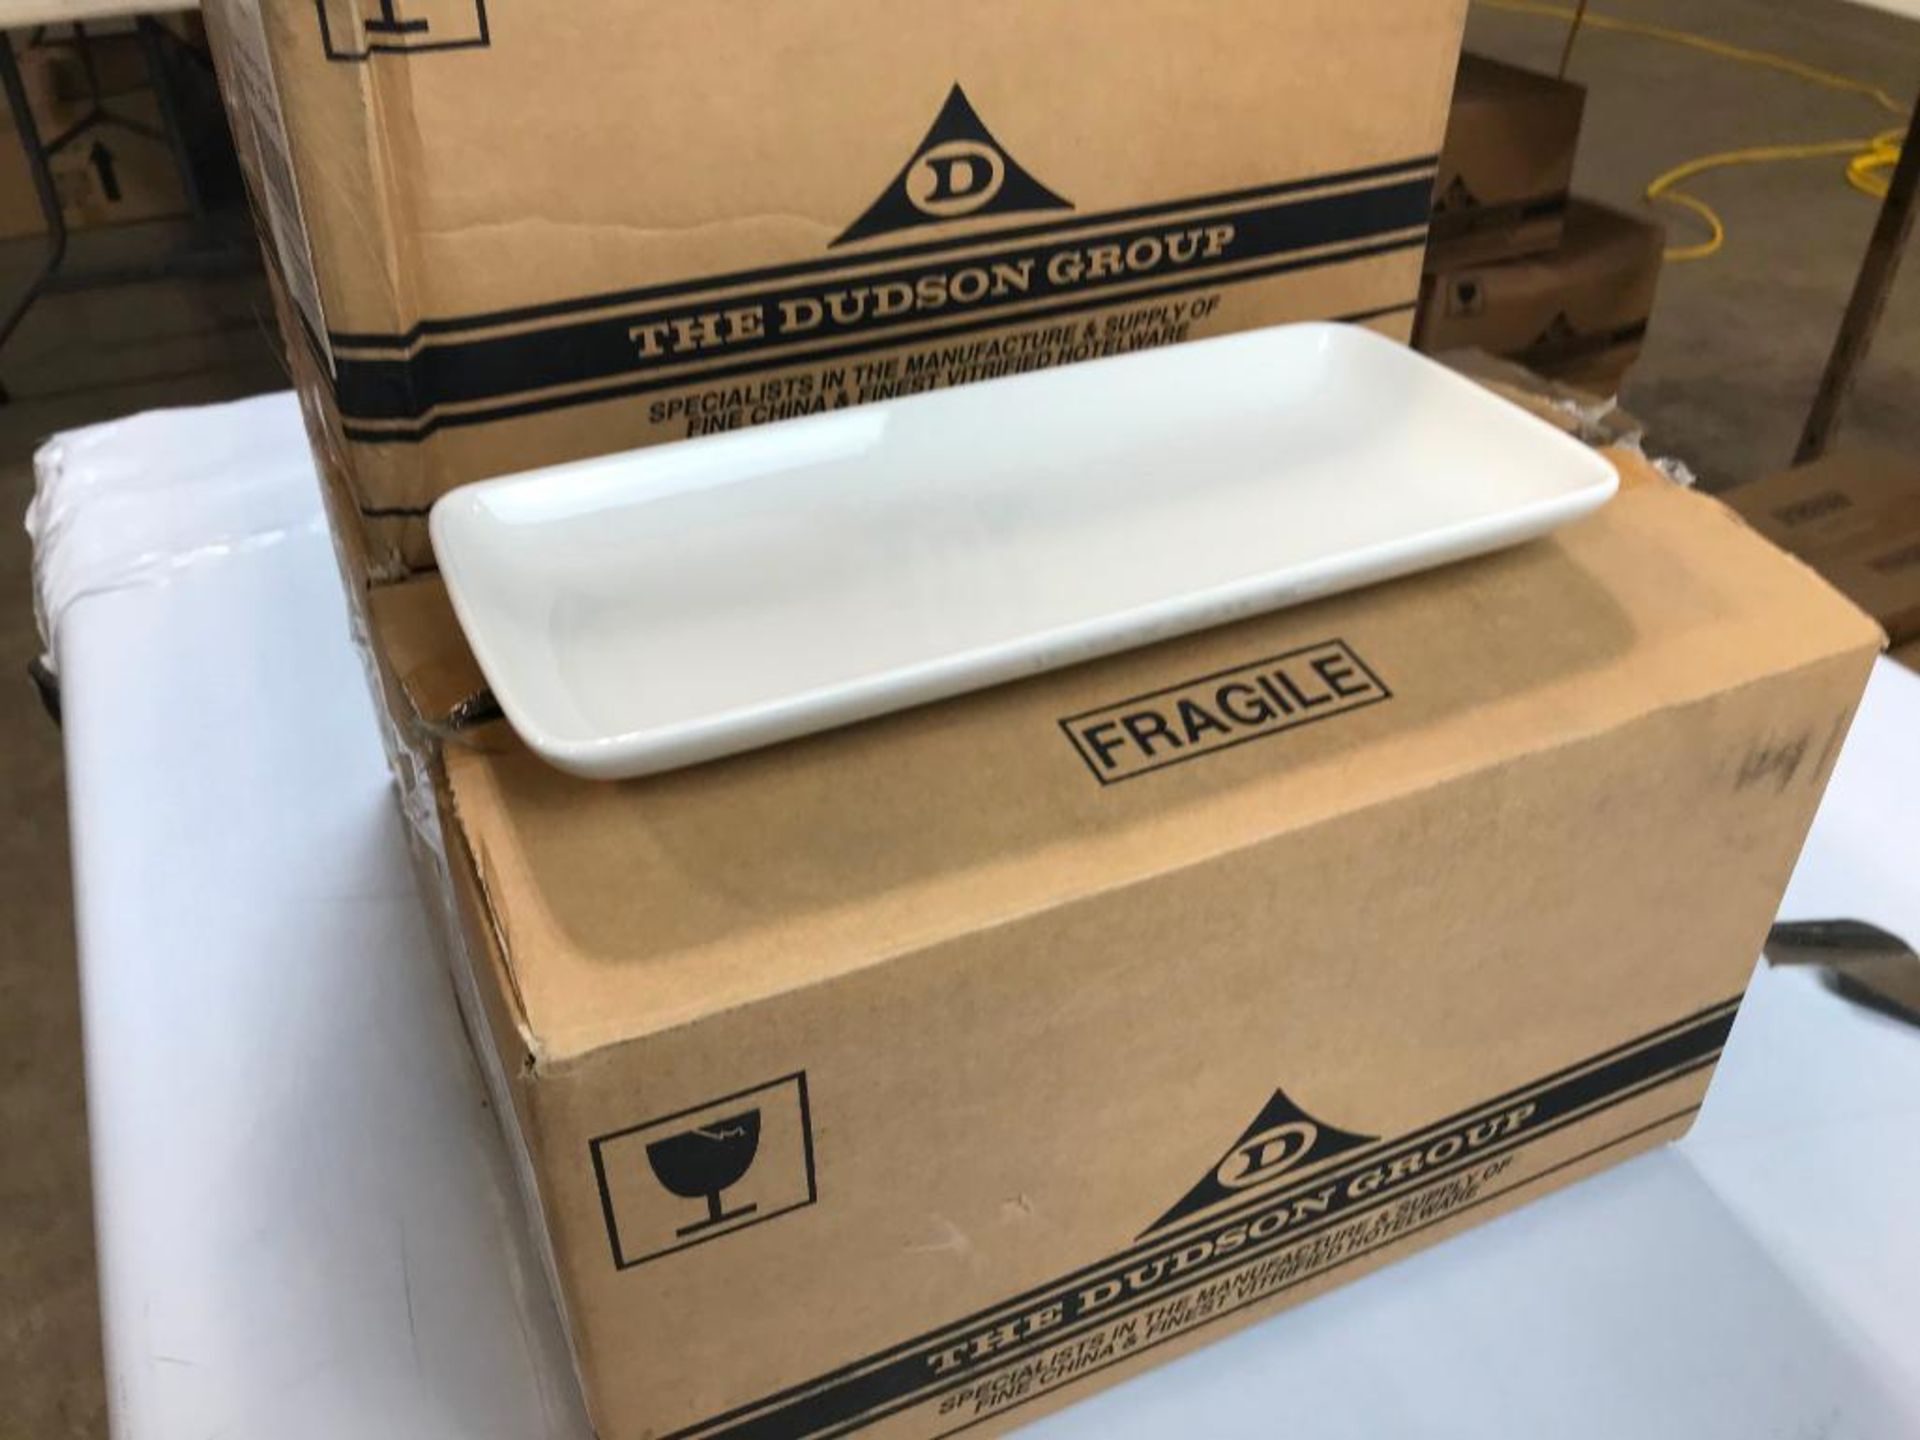 3 CASES OF DUDSON GEOMETRIX RECTANGLE CHEF'S TRAY 10 5/8" - 8/CASE, MADE IN ENGLAND - Image 4 of 5